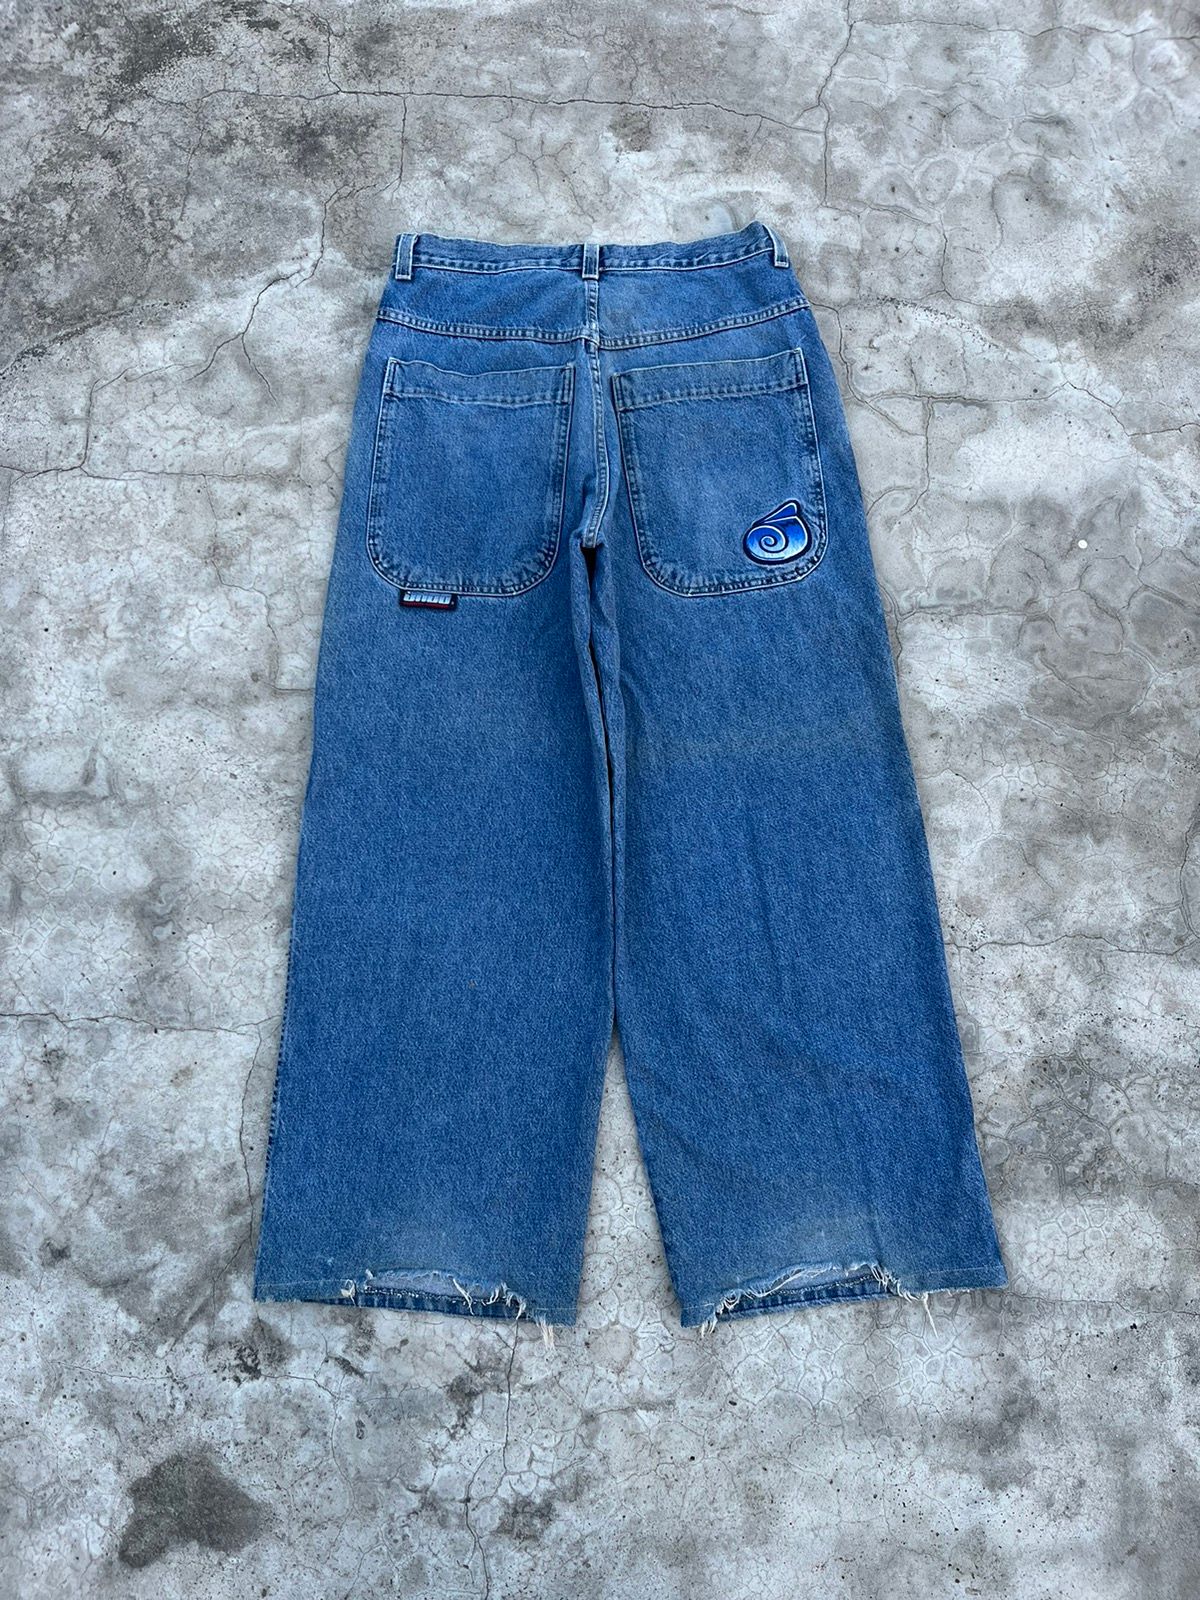 Streetwear 90s JNCO Twin Cannon Skater pant | Grailed